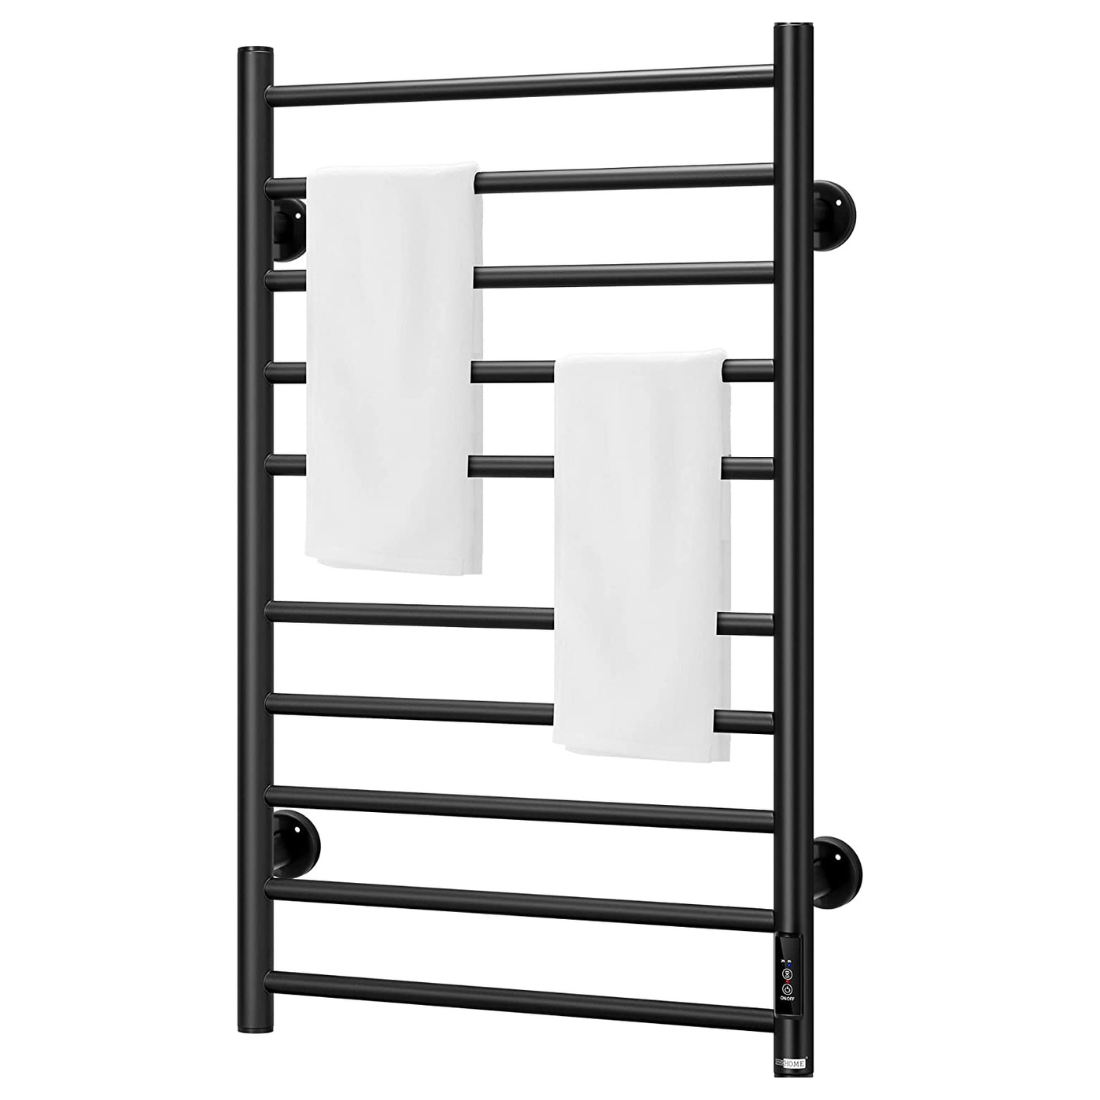 Compact Countertop Bath Towel Warmer with Timer and Auto Shut Off